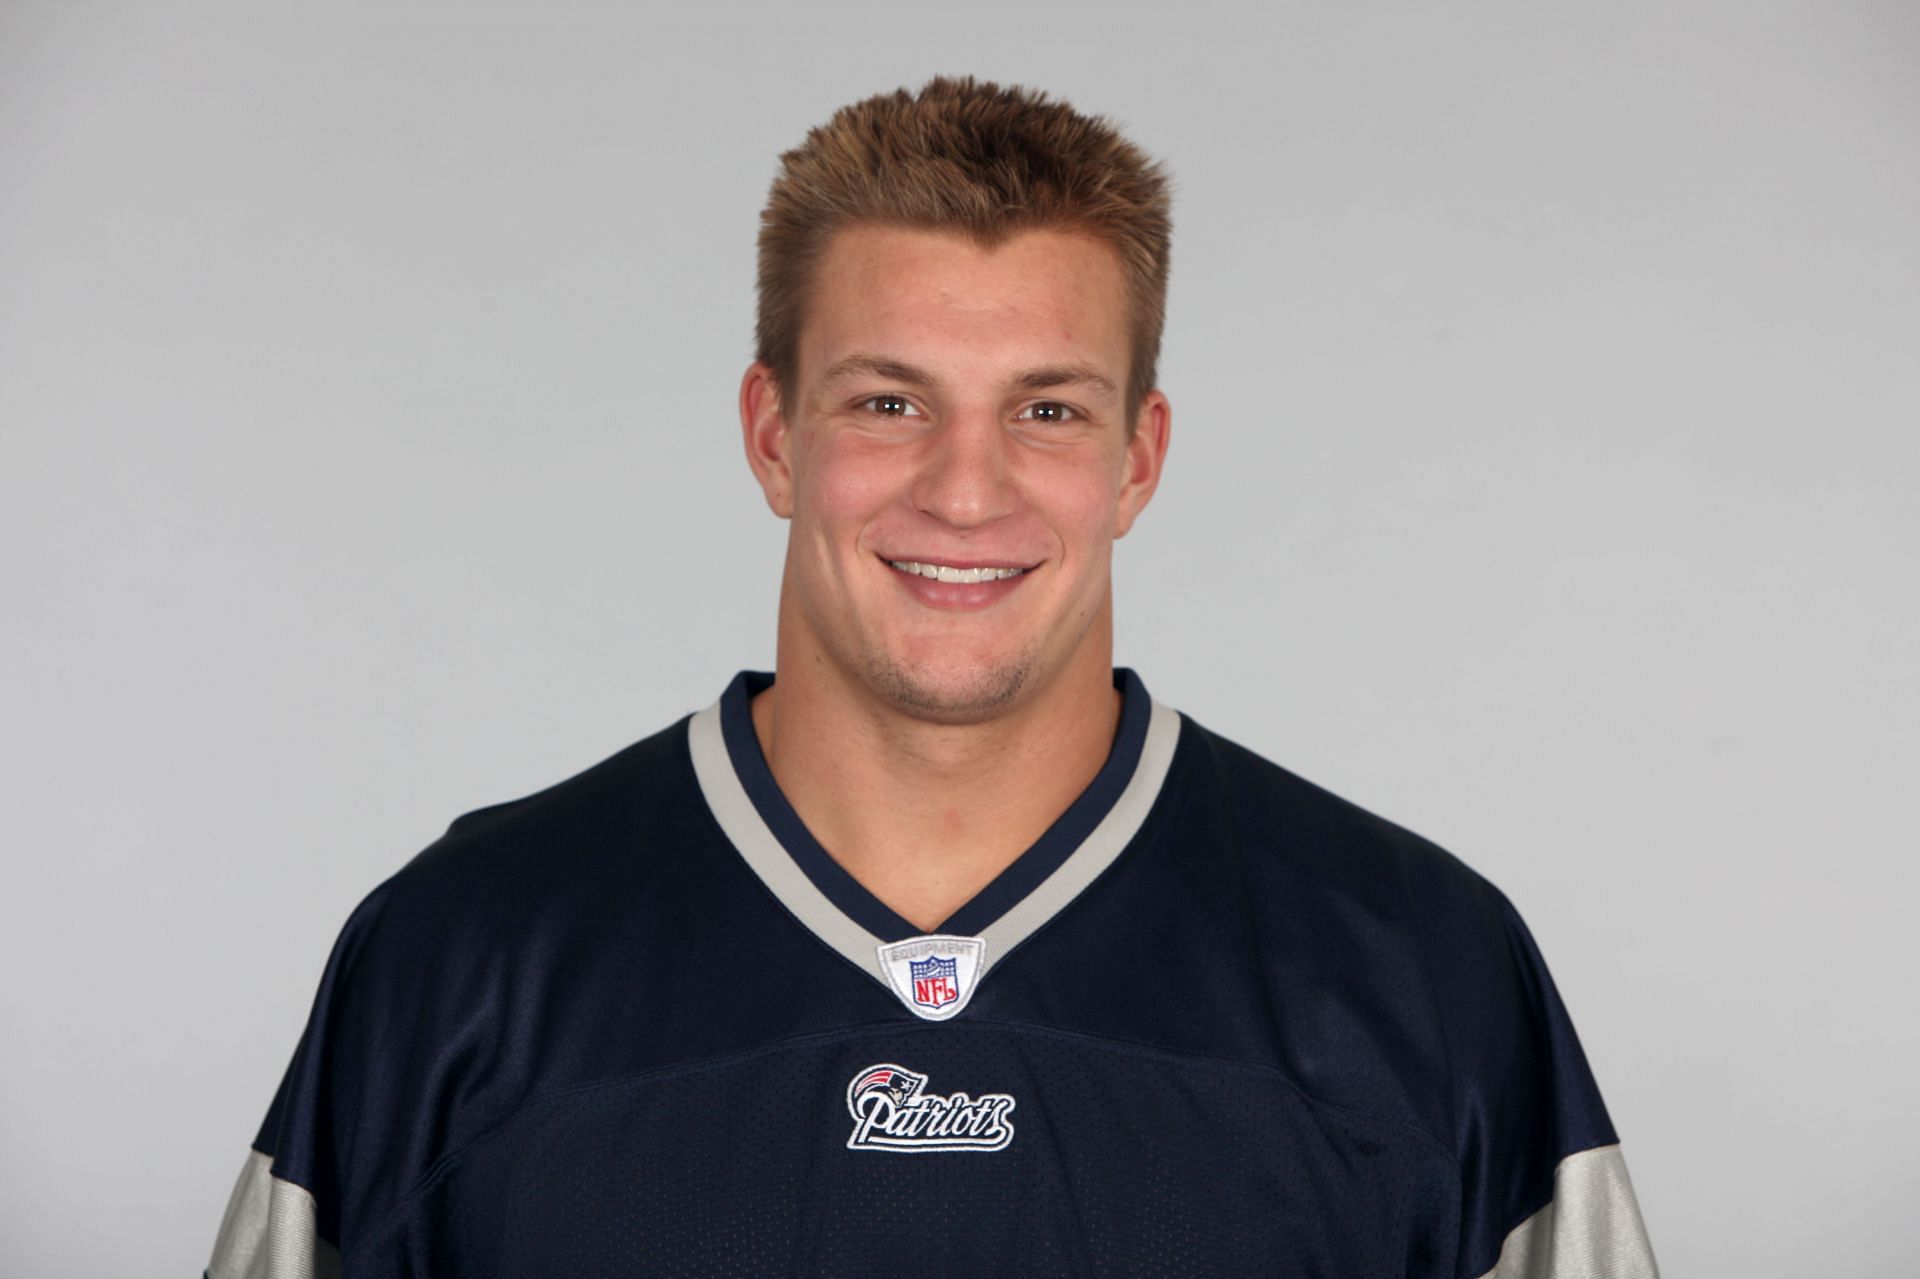 Gronkowski first headshot with the 2010 New England Patriots